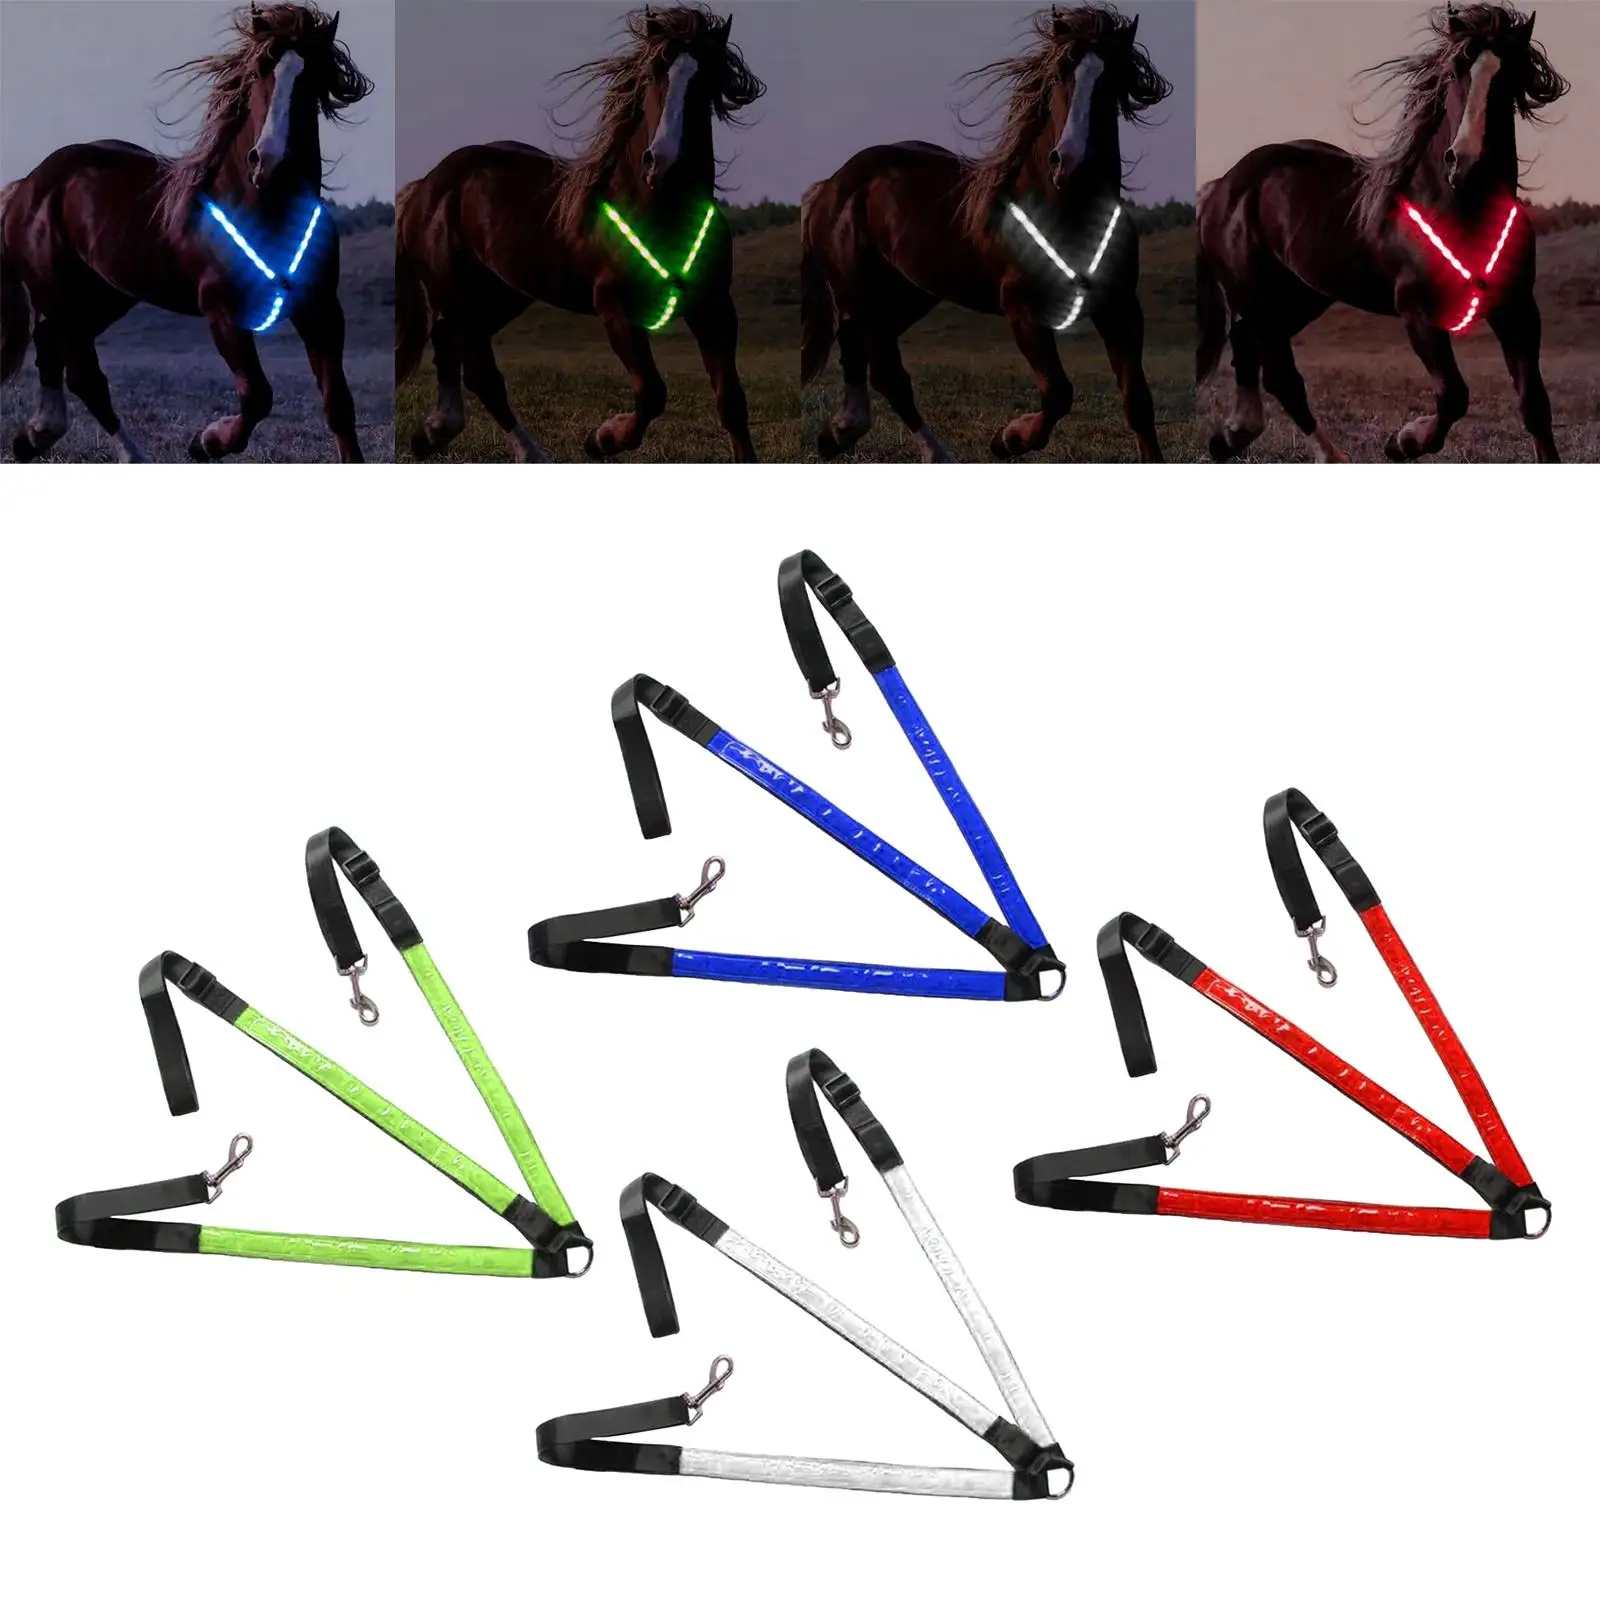 Adjustable LED Horse Breastplate Collar Battery Operated Equestrian Safety Gear for Horseback Riding Horse Show